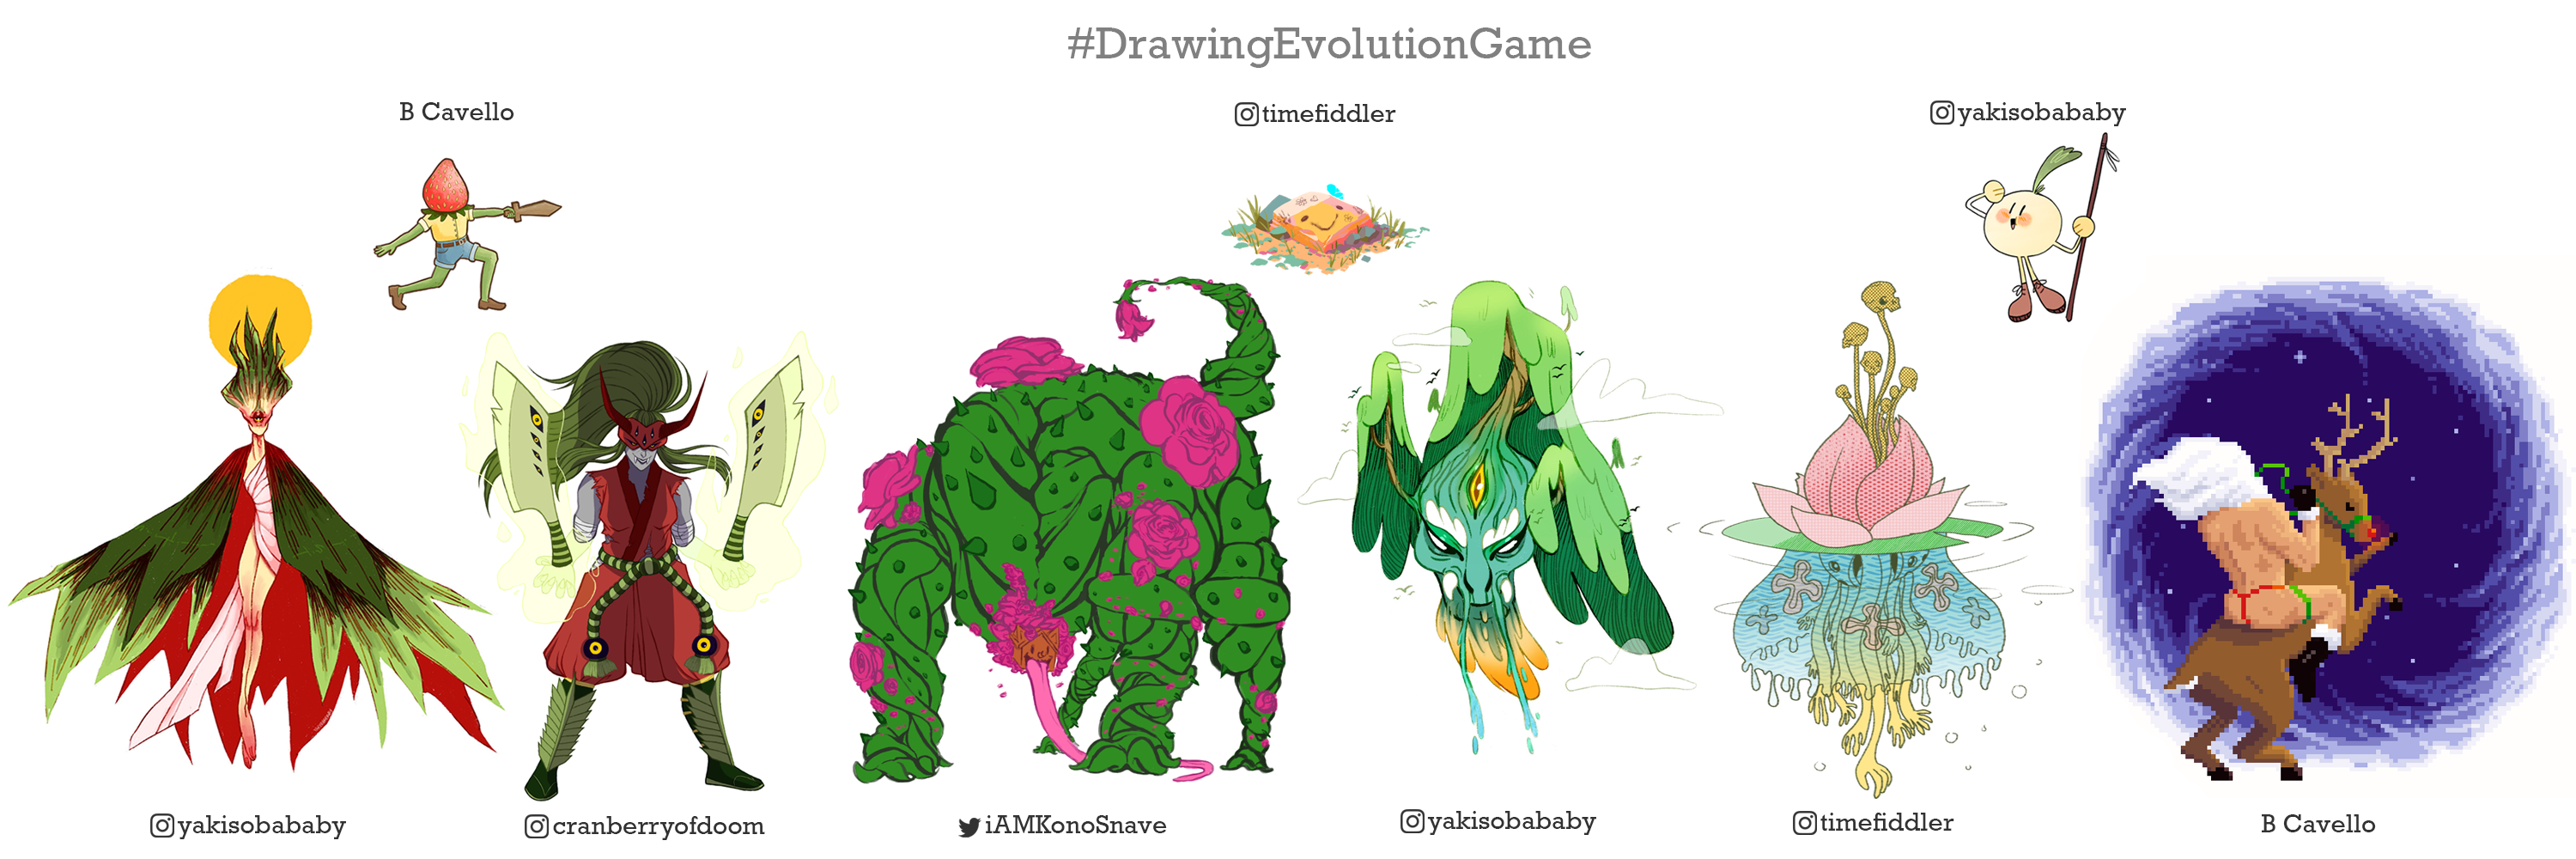 Compilation of all the seed characters with their final evolutions drawn by B Cavello, YakisobaBaby, CranberryOfDoom, TimeFiddler, and iAMKonoSnave